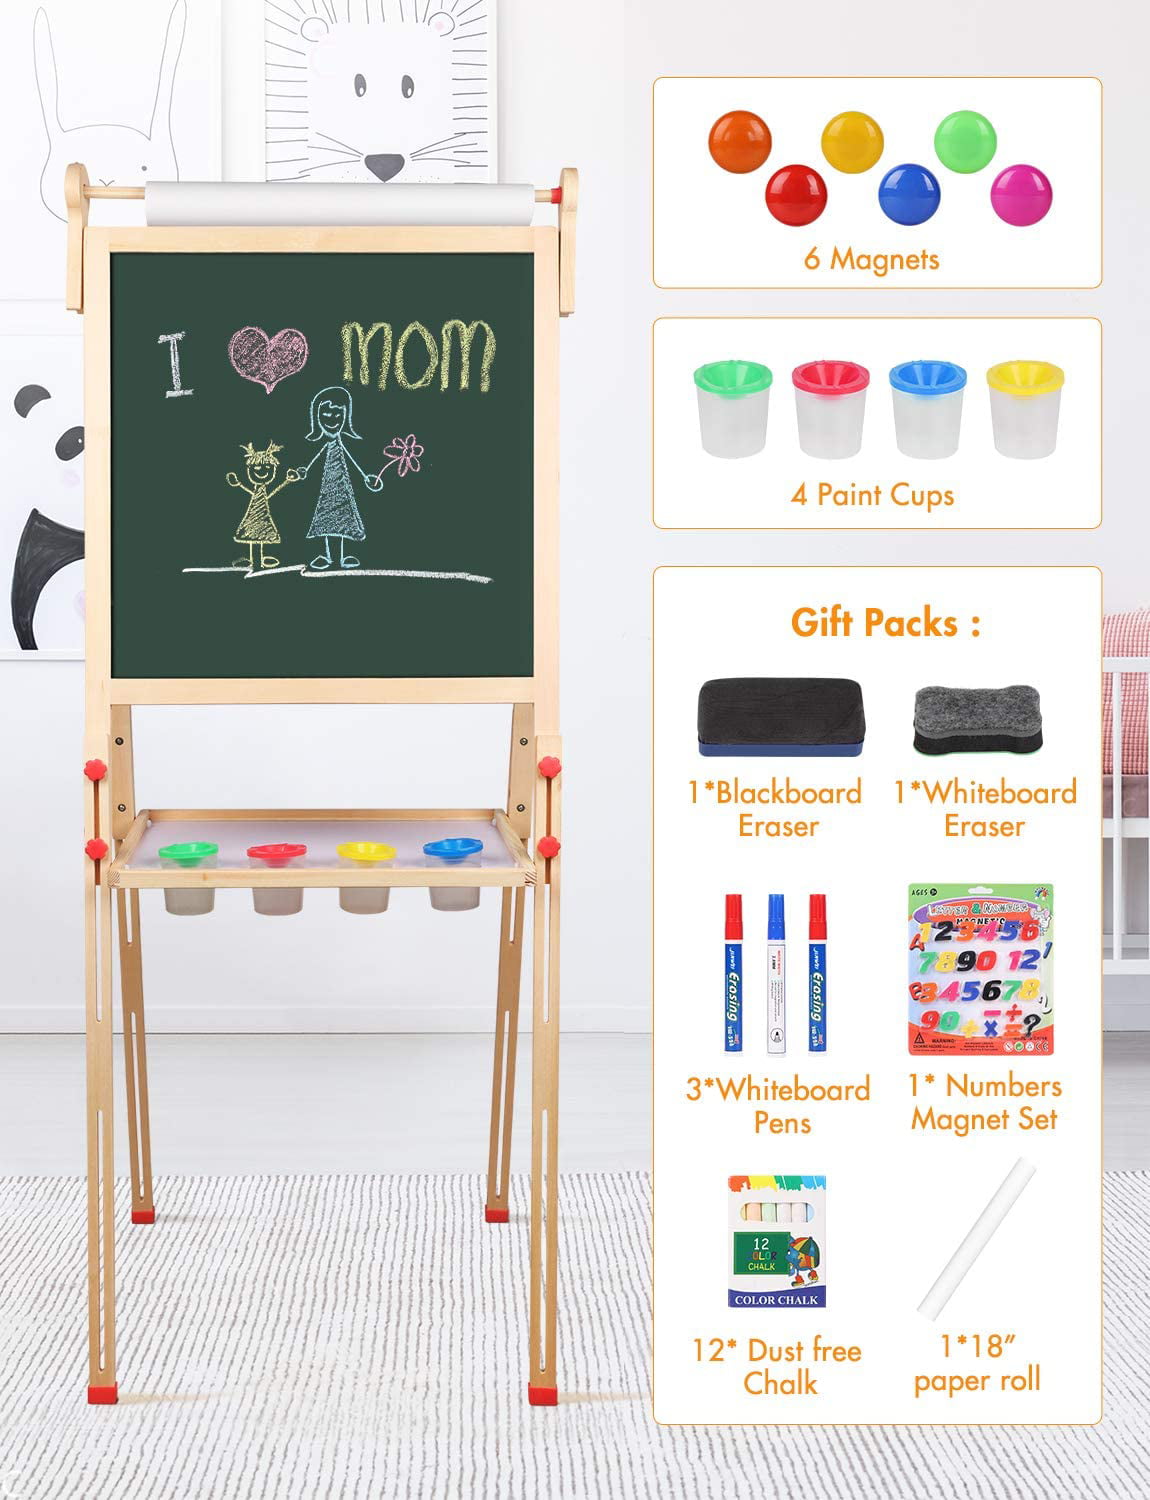 Double Sided Whiteboard Chalkboard Children Easel,Adjustable Height Magnetic Dry Easel Drawing with Kids Art Easel Playset for Boys Girls Gifts YOHOOLYO Kids Wooden Art Easel with Paper Roll